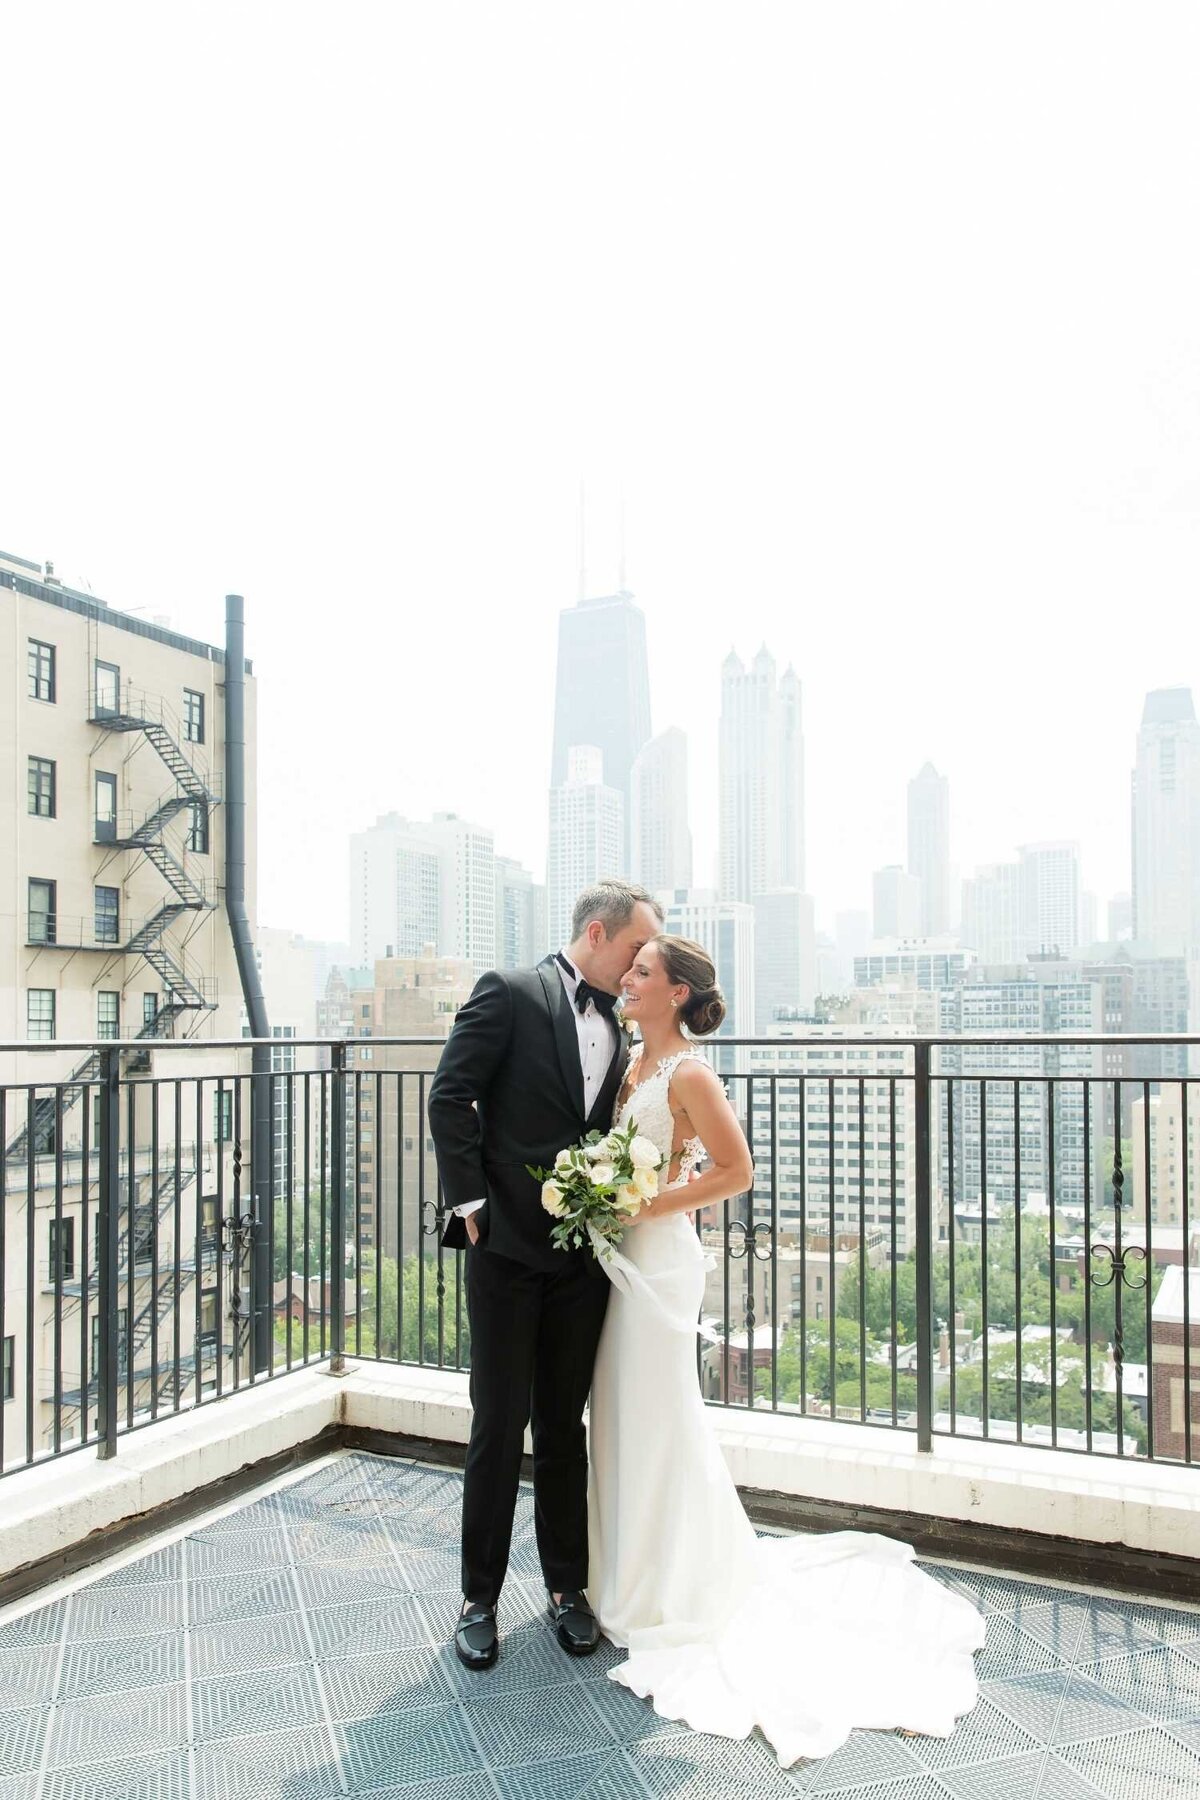 Romantic Rooftop First Look in Chicago at the Ambassador Hotel before a Luxury Chicago Outdoor Historic Wedding Venue.